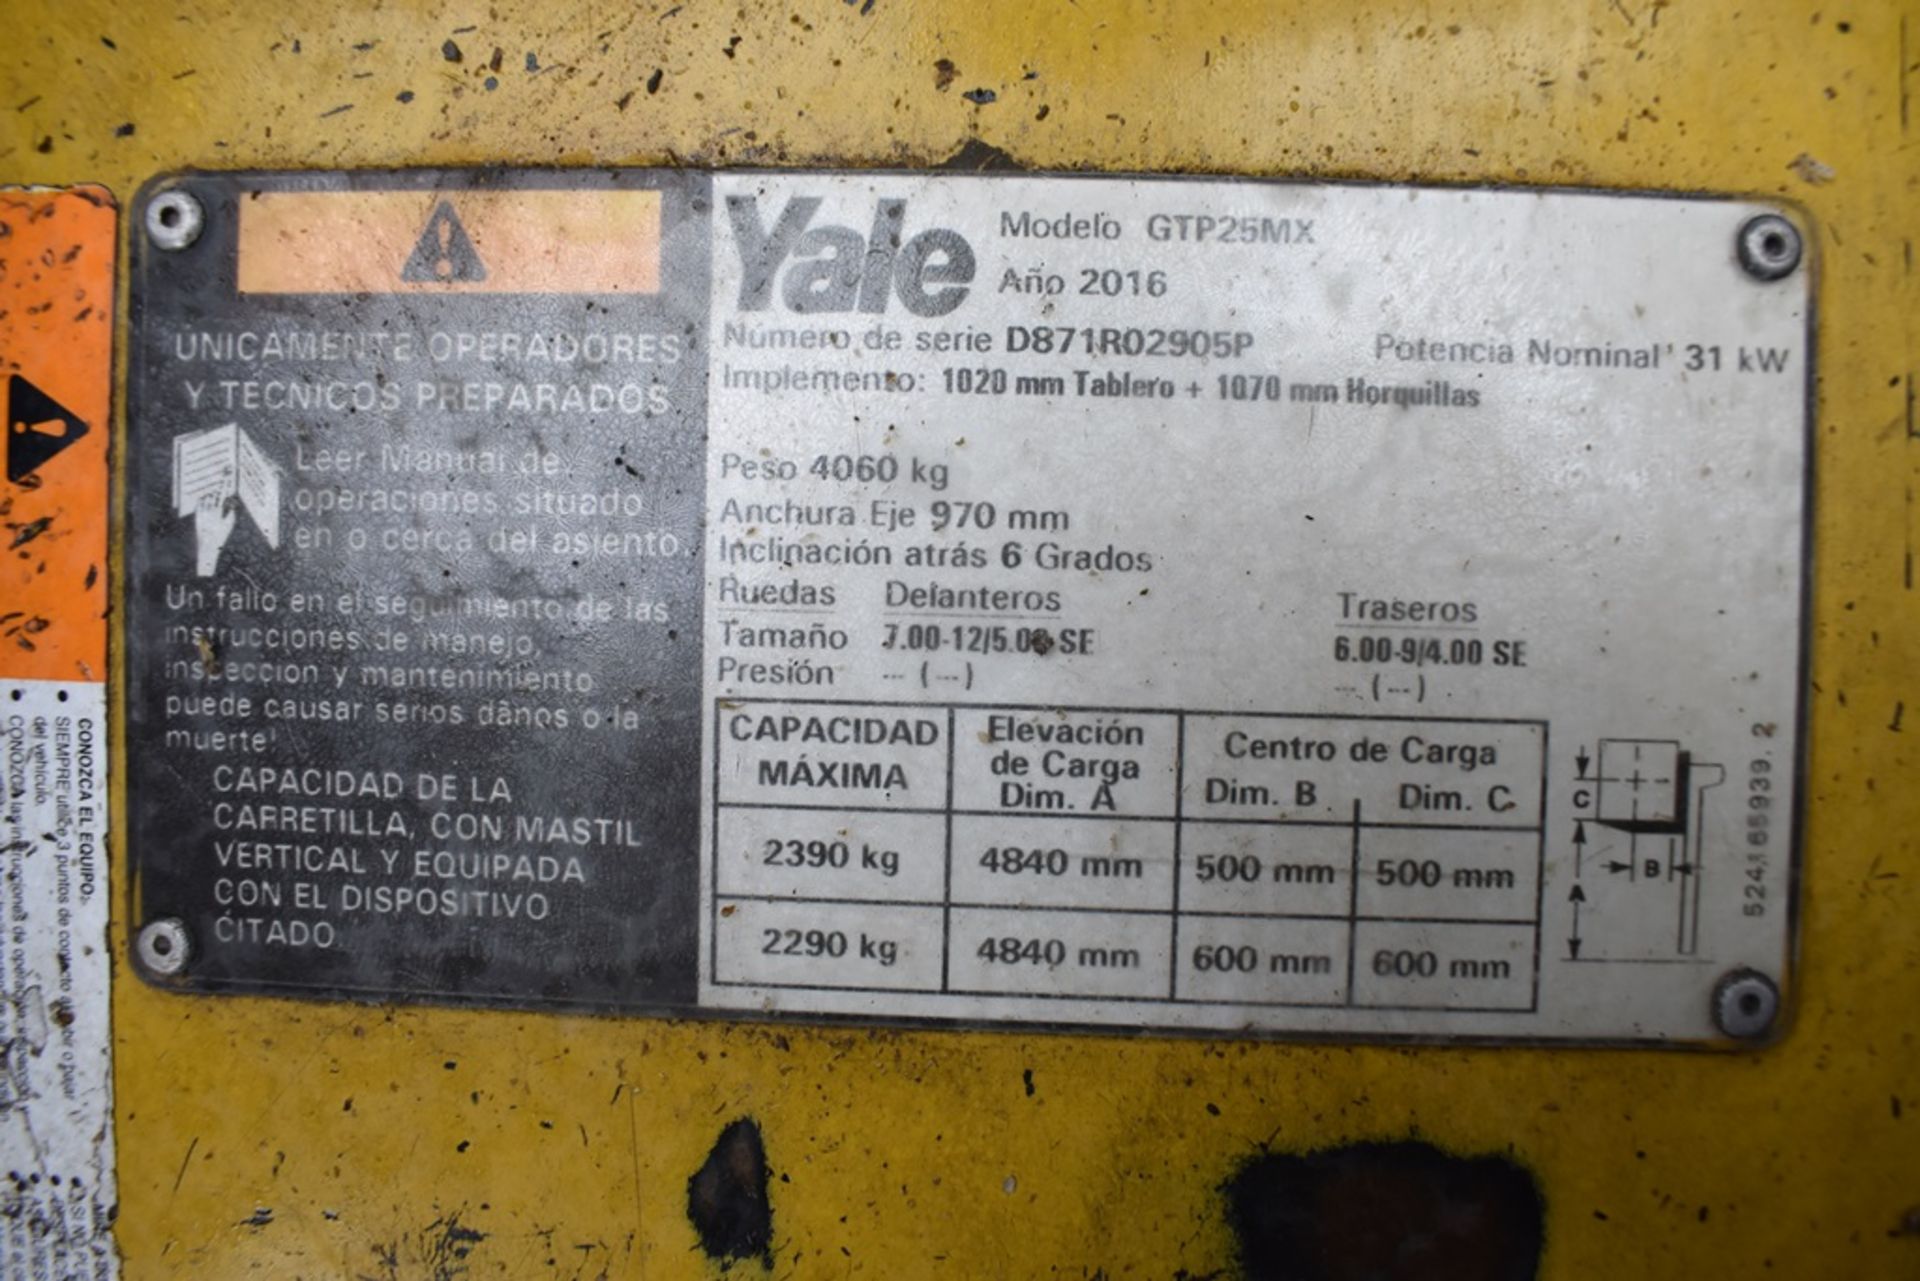 Yale Forklift, model GTP25MX, S/N D871R02905P, year 2016, 5000 lb capacity - Image 46 of 47